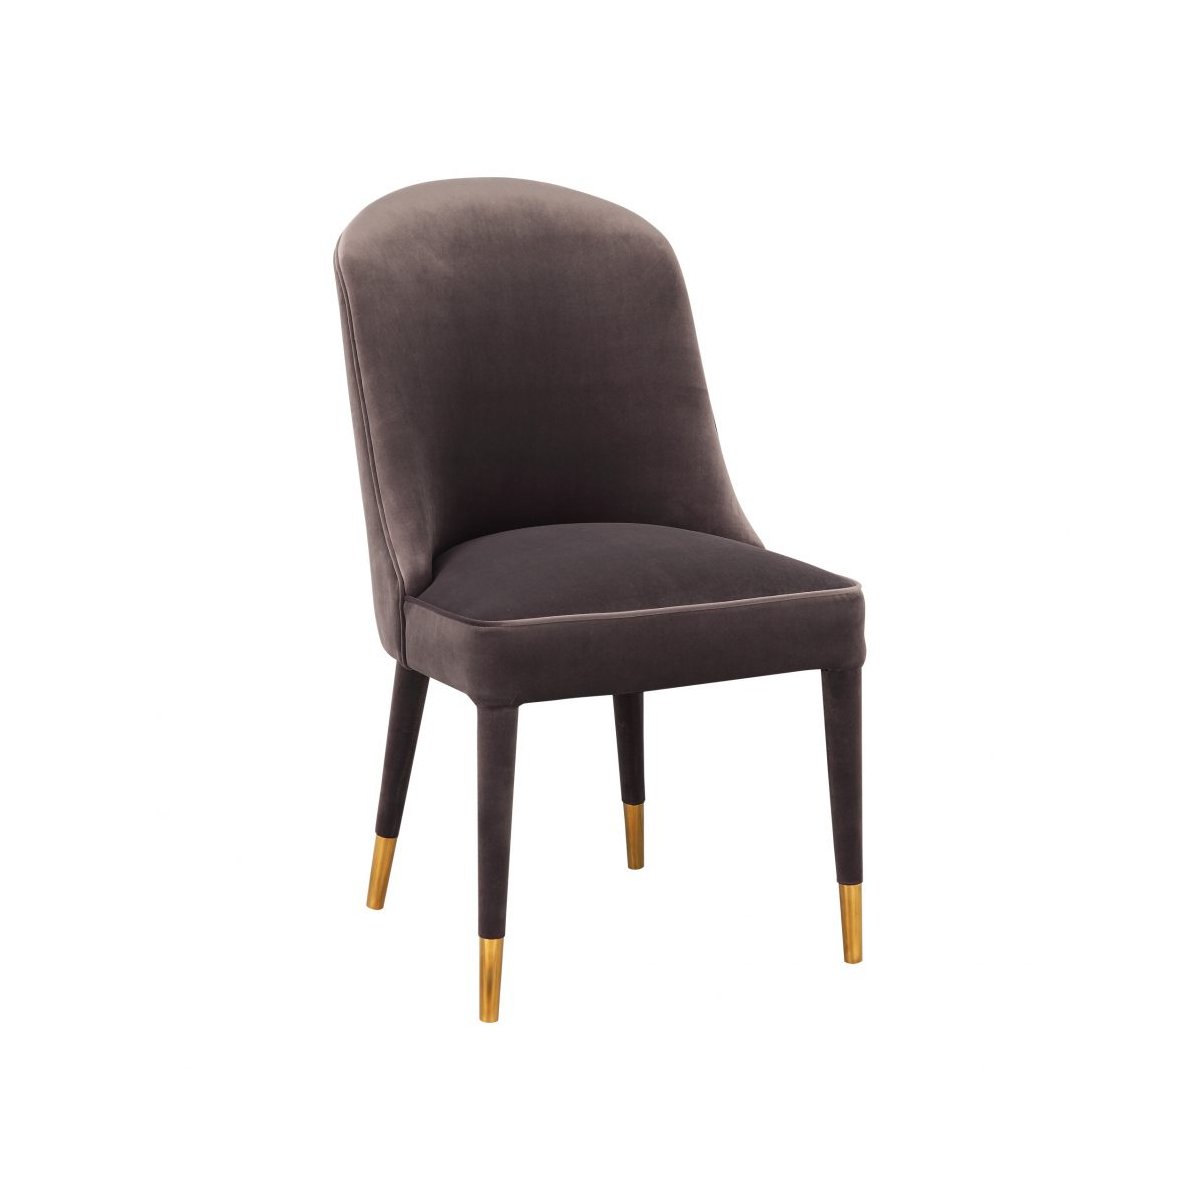 Load image into Gallery viewer, Liberty Dining Chair-M2 GreyDining Chairs Moe&amp;#39;s  Grey   Four Hands, Burke Decor, Mid Century Modern Furniture, Old Bones Furniture Company, Old Bones Co, Modern Mid Century, Designer Furniture, https://www.oldbonesco.com/
